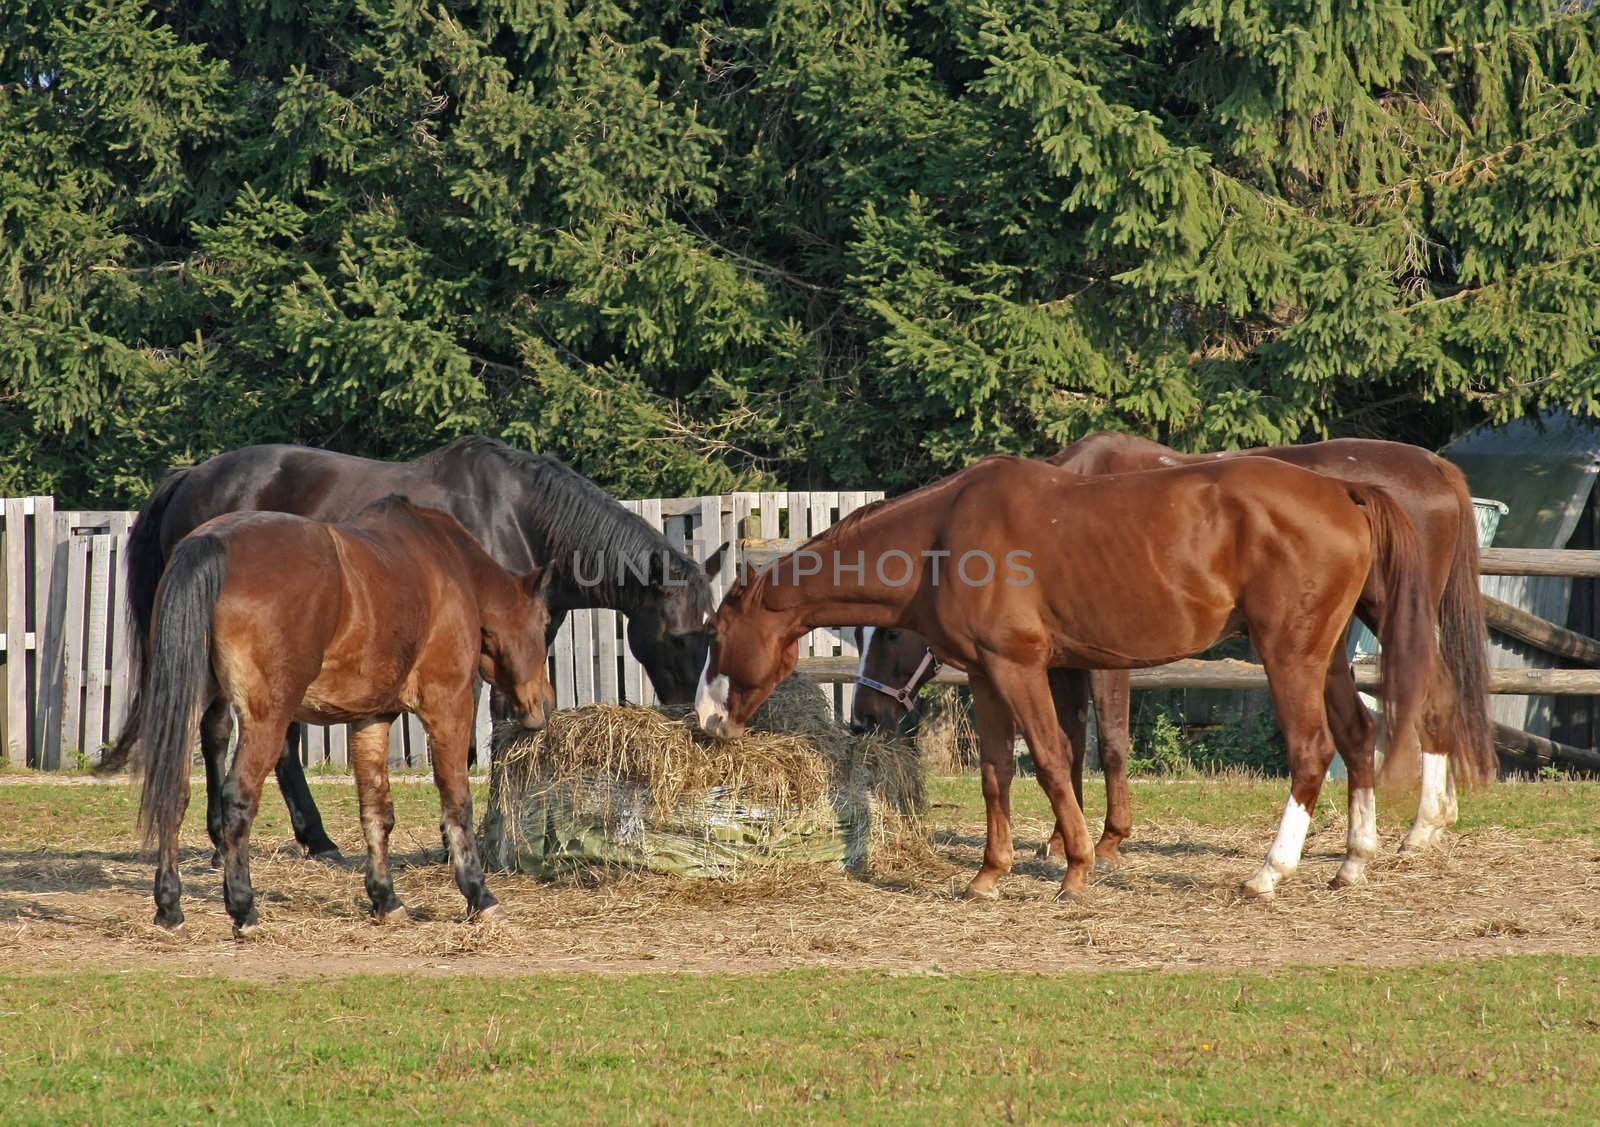 this image shows four horses at feed